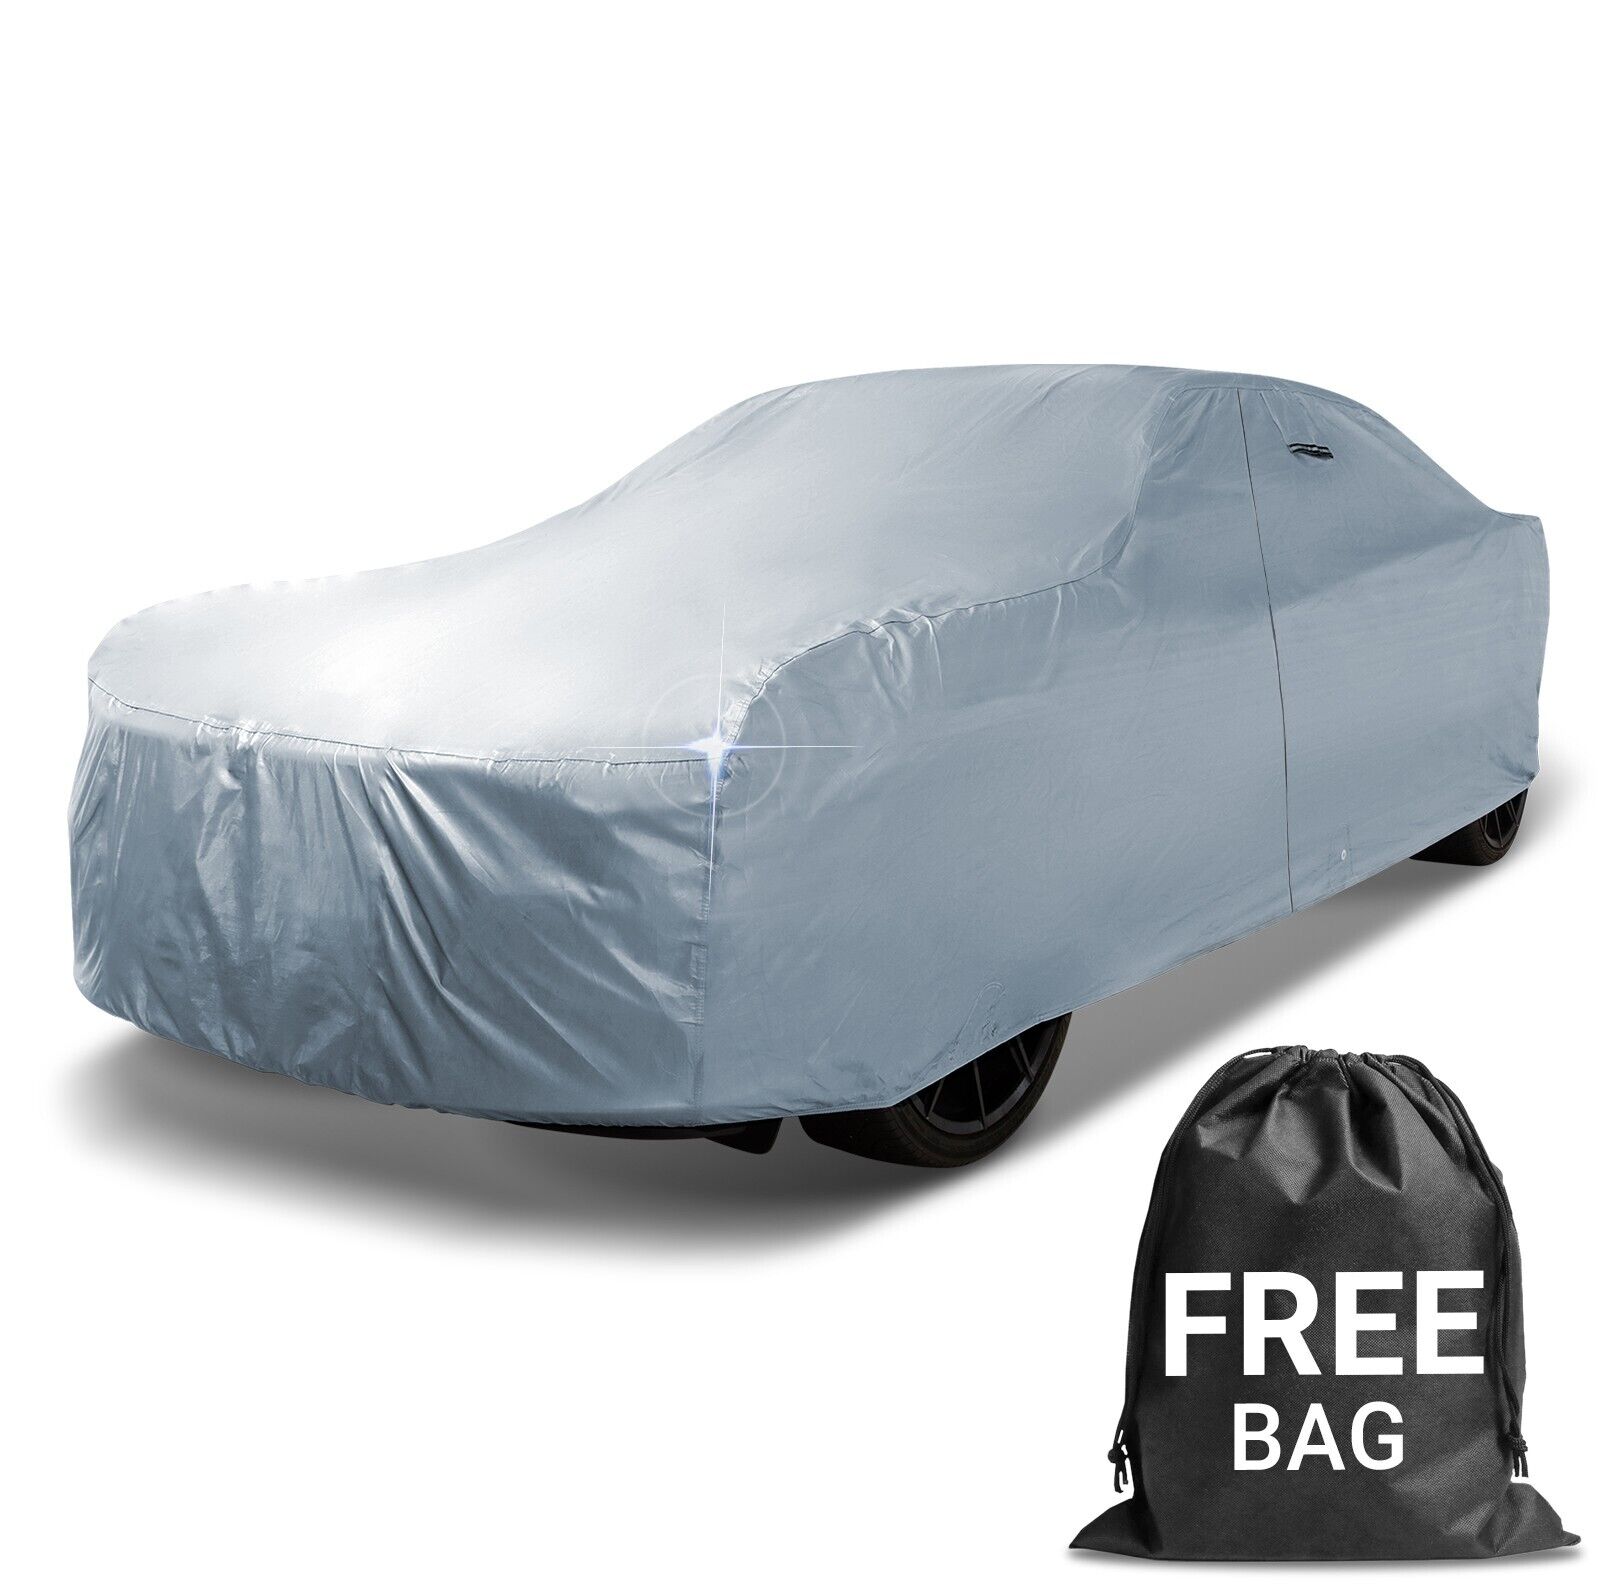 Honda CRZ High Quality Protection Car Cover Waterproof Sun-proof